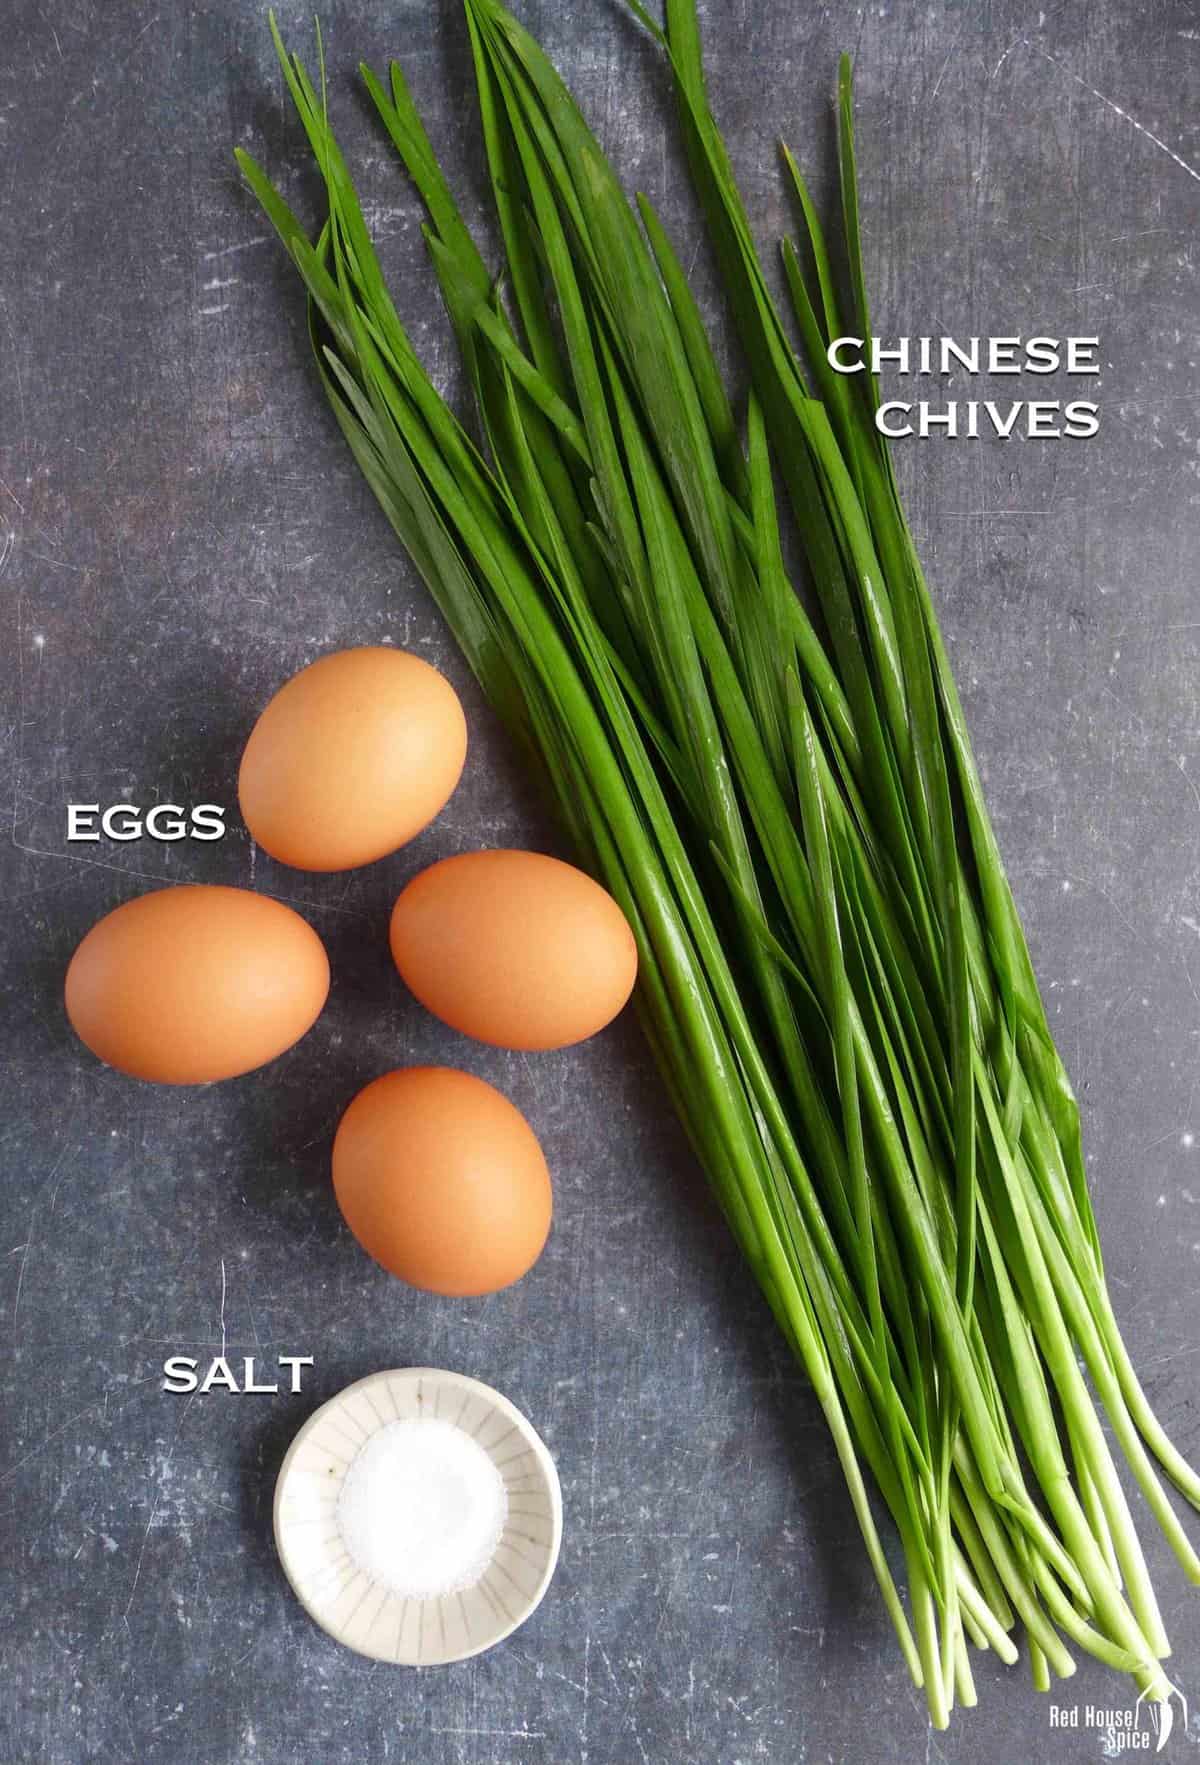 raw chinese chives, eggs and salt.